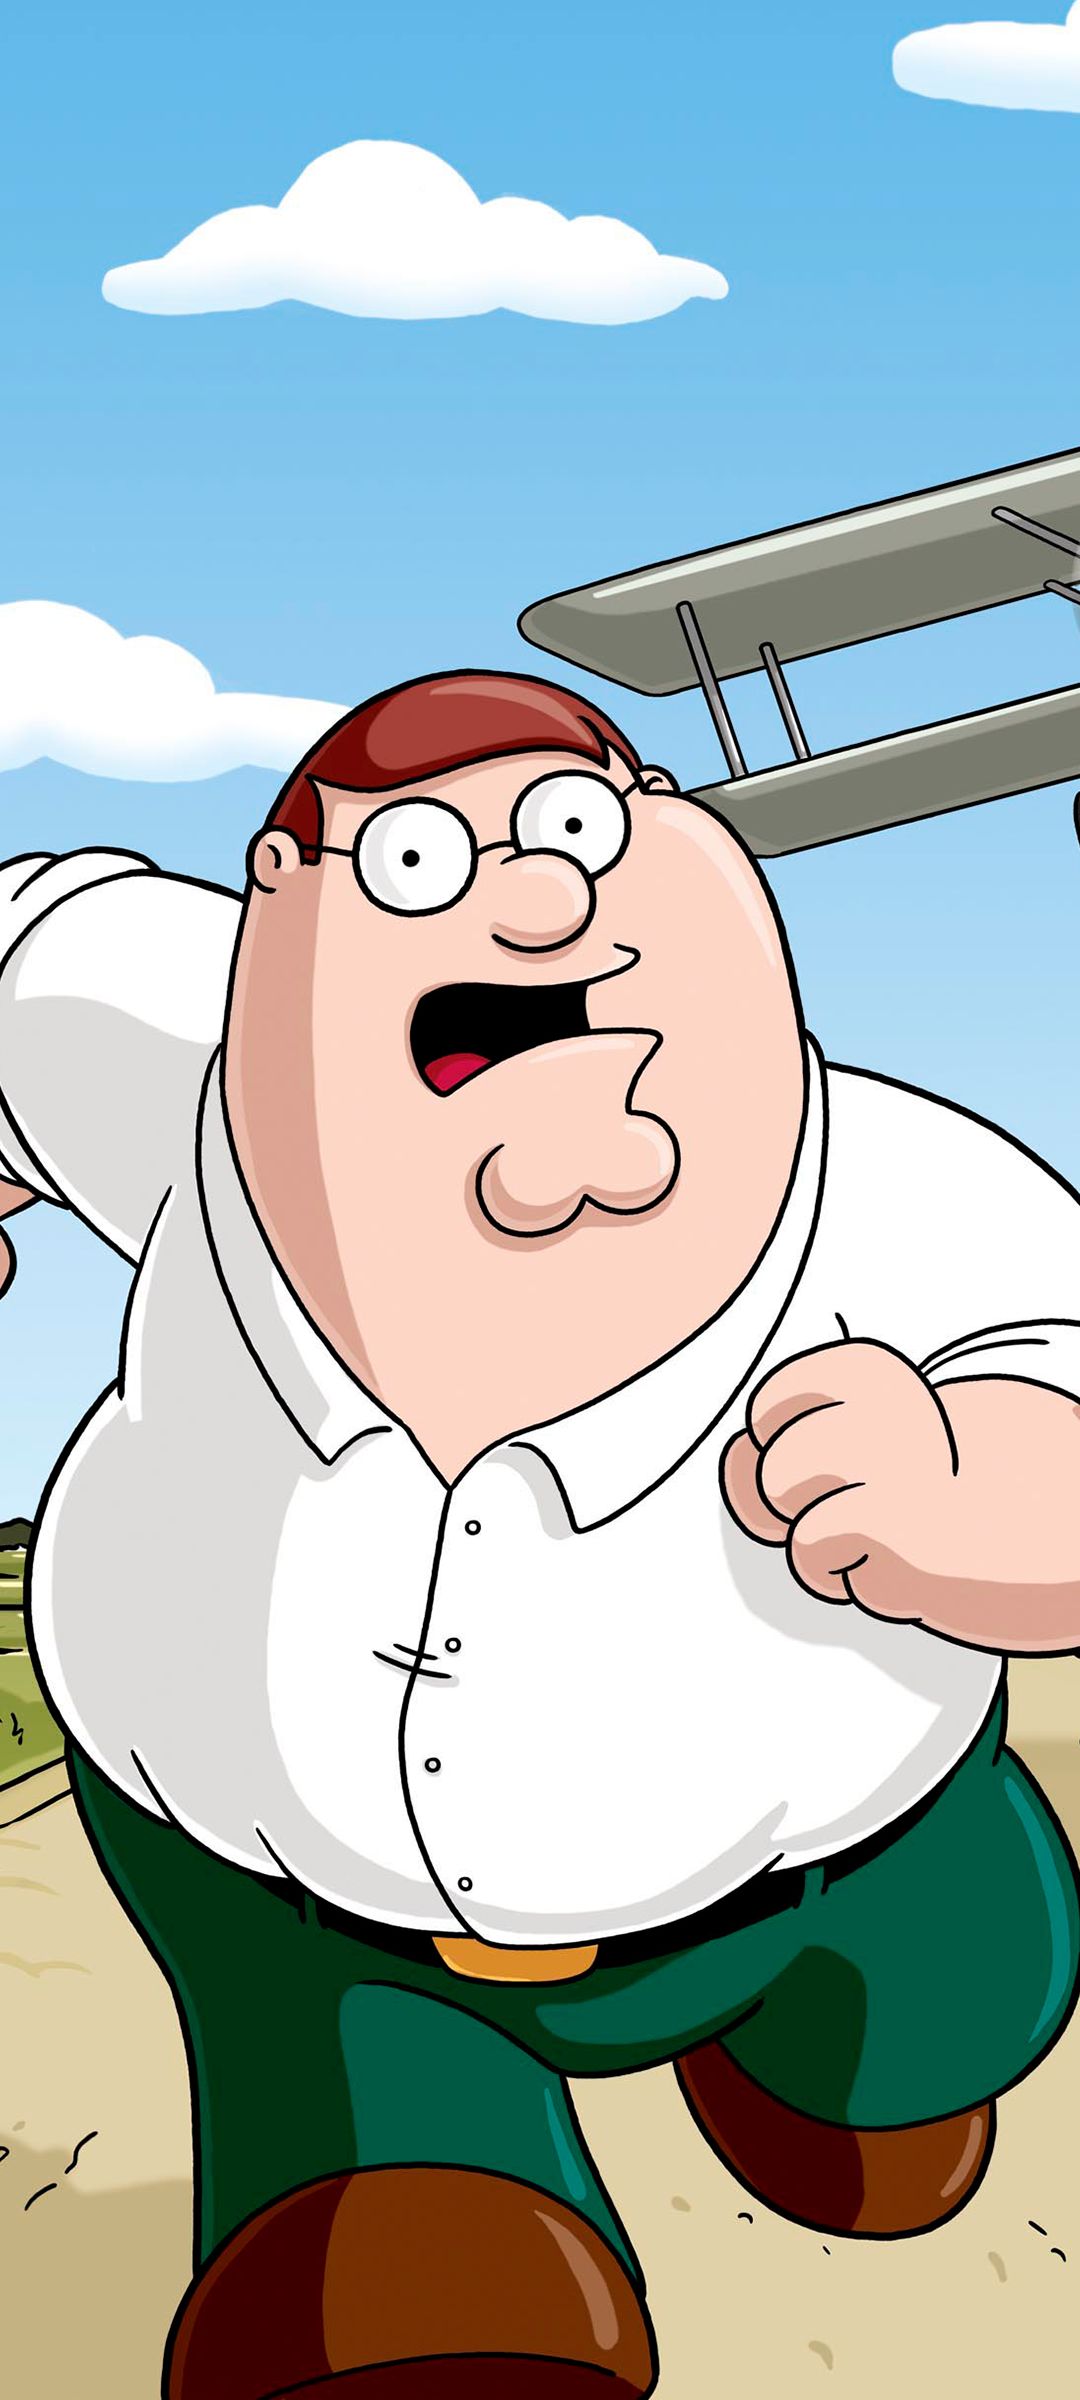 peter griffin, tv show, family guy wallpaper for mobile